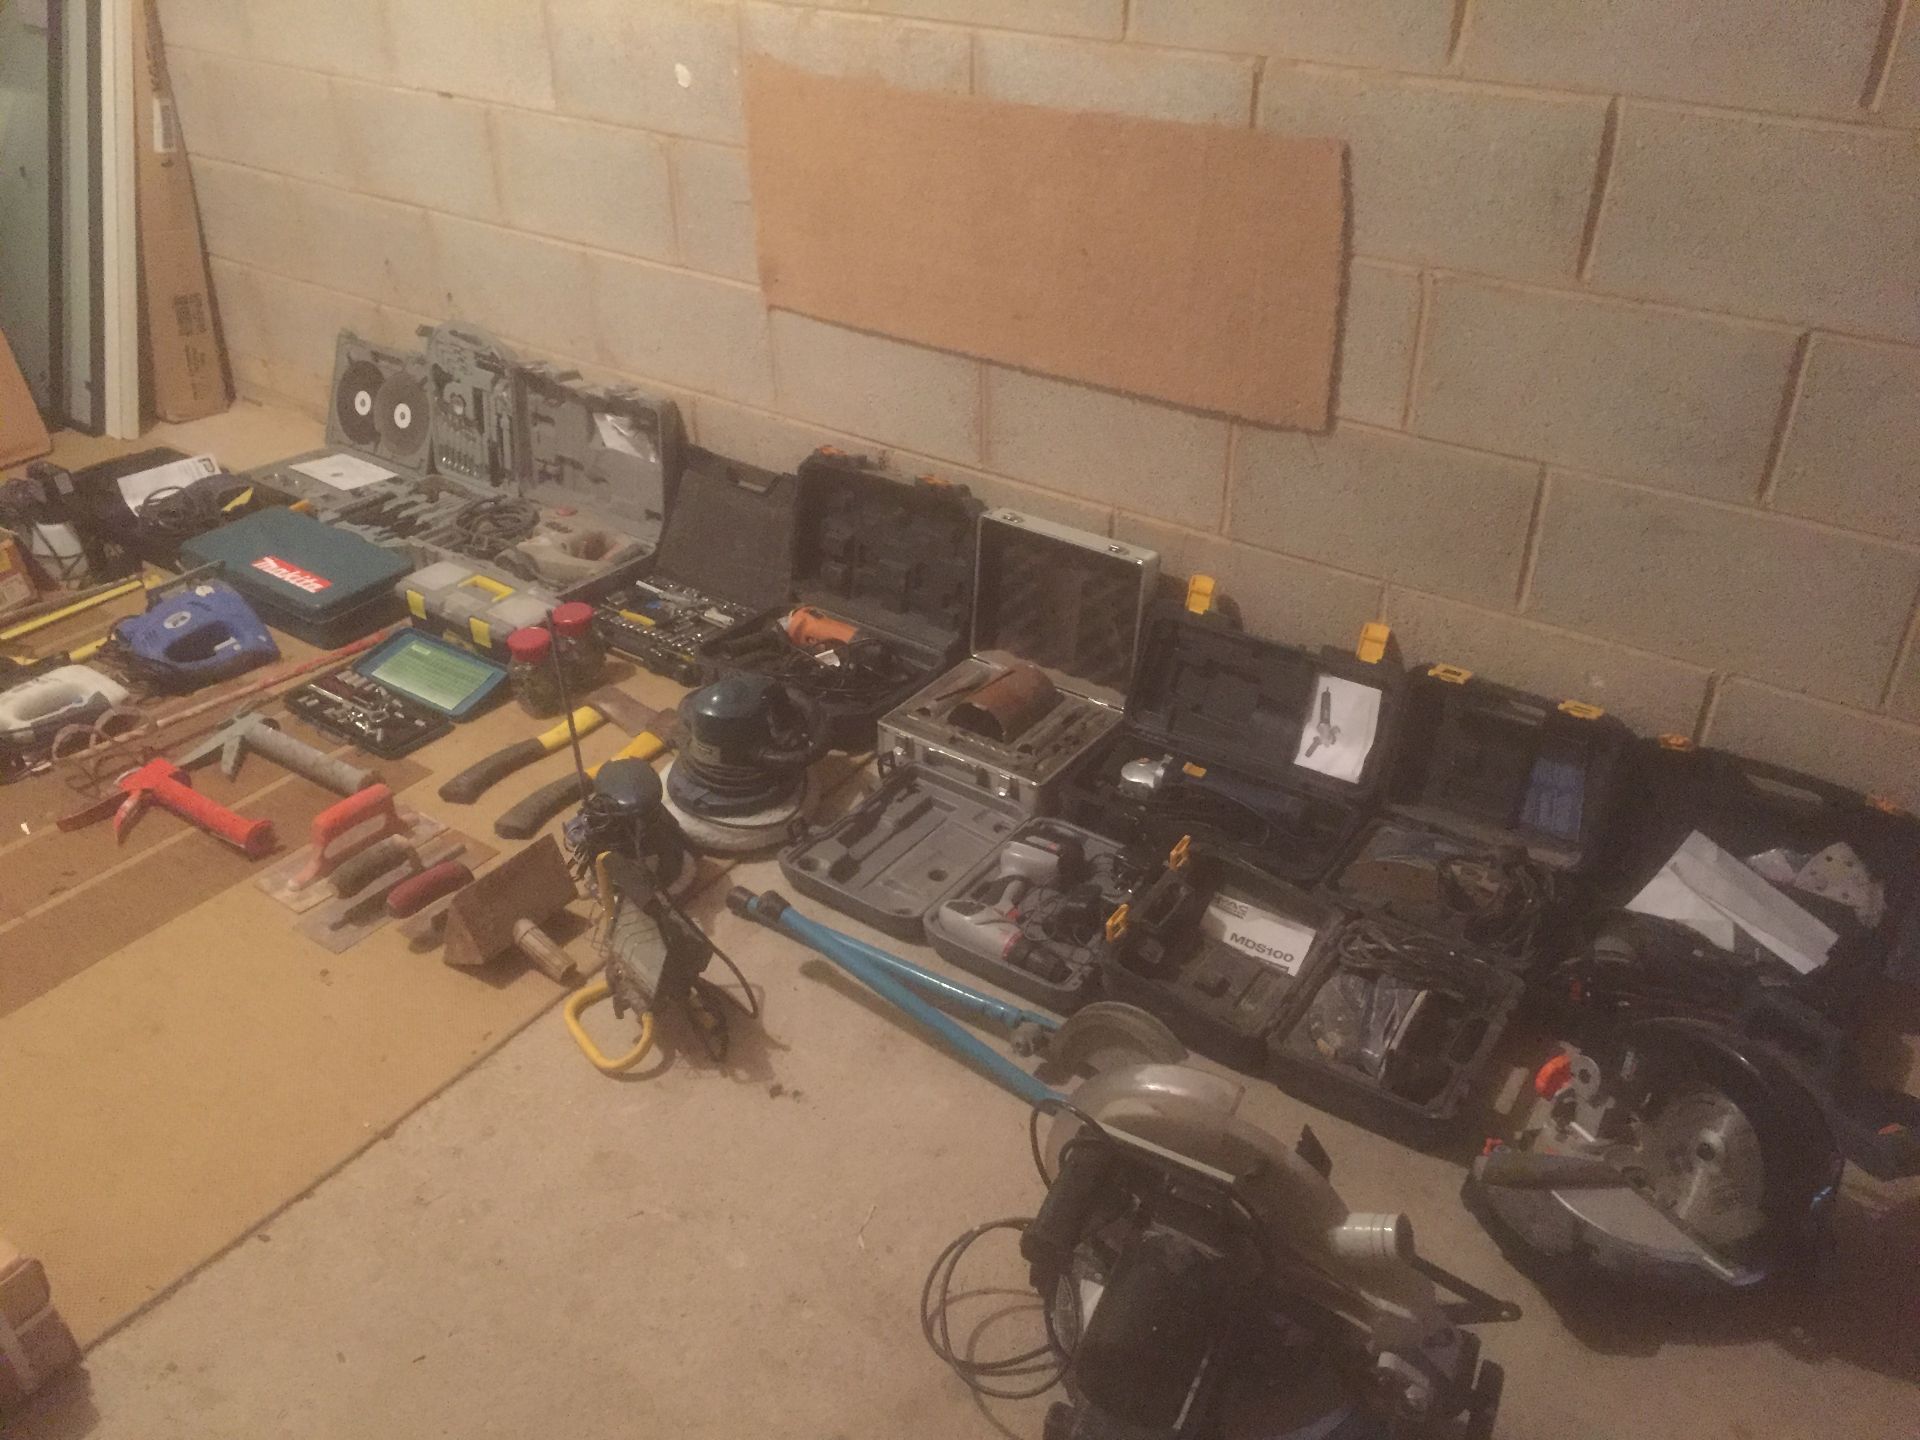 HUGE JOB LOT OF VARIOUS POWER TOOLS, HAND TOOLS, ACCESSORIES, NO RESERVE - Image 5 of 8